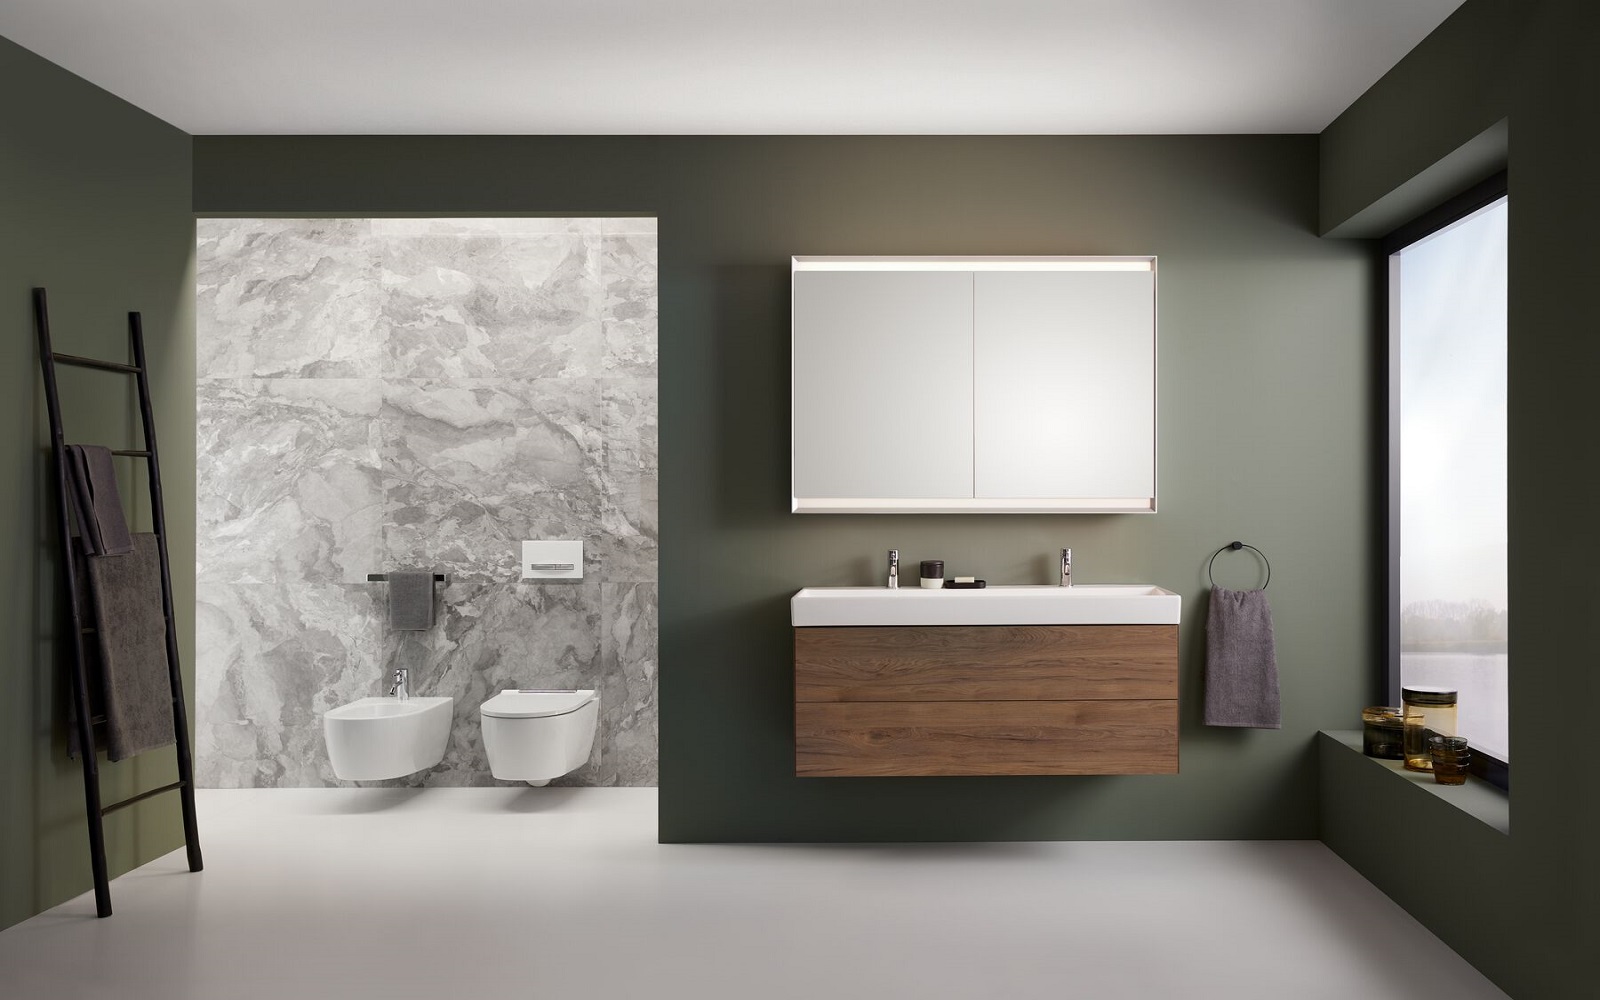 Geberit bathroom fittings against a gree wall with wooden detail